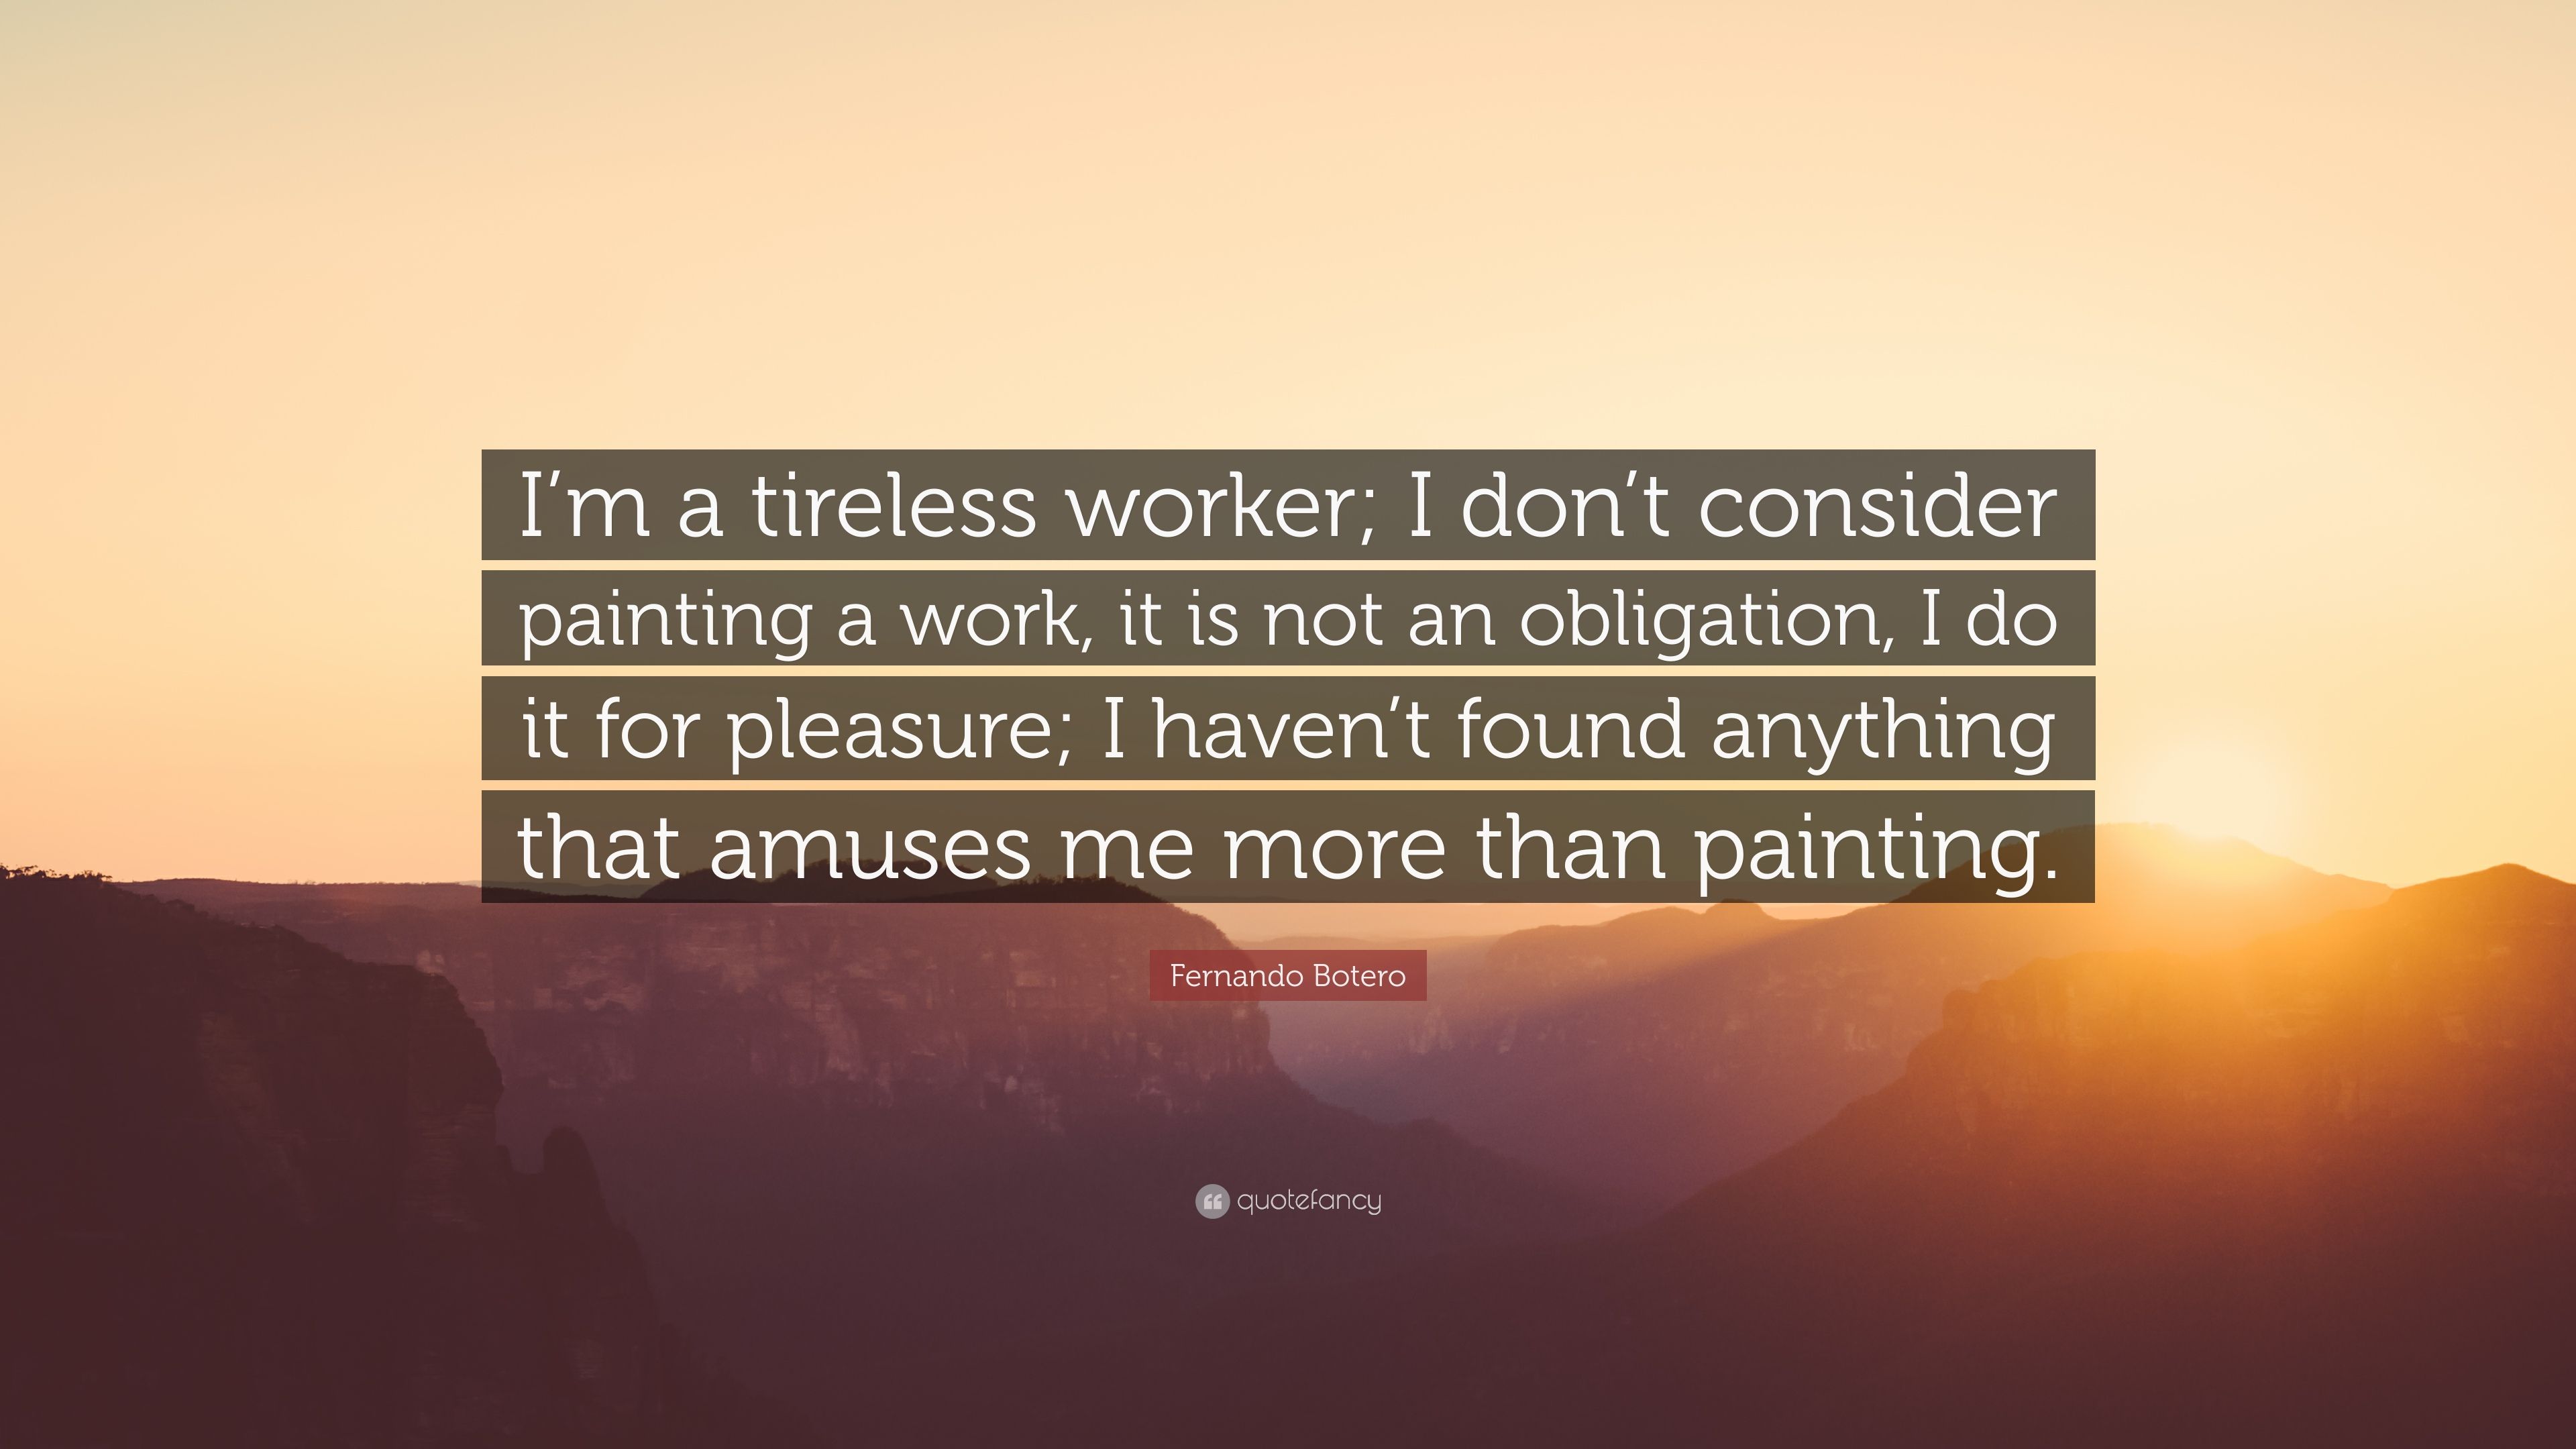 Fernando Botero Quote: “I'm a tireless worker; I don't consider